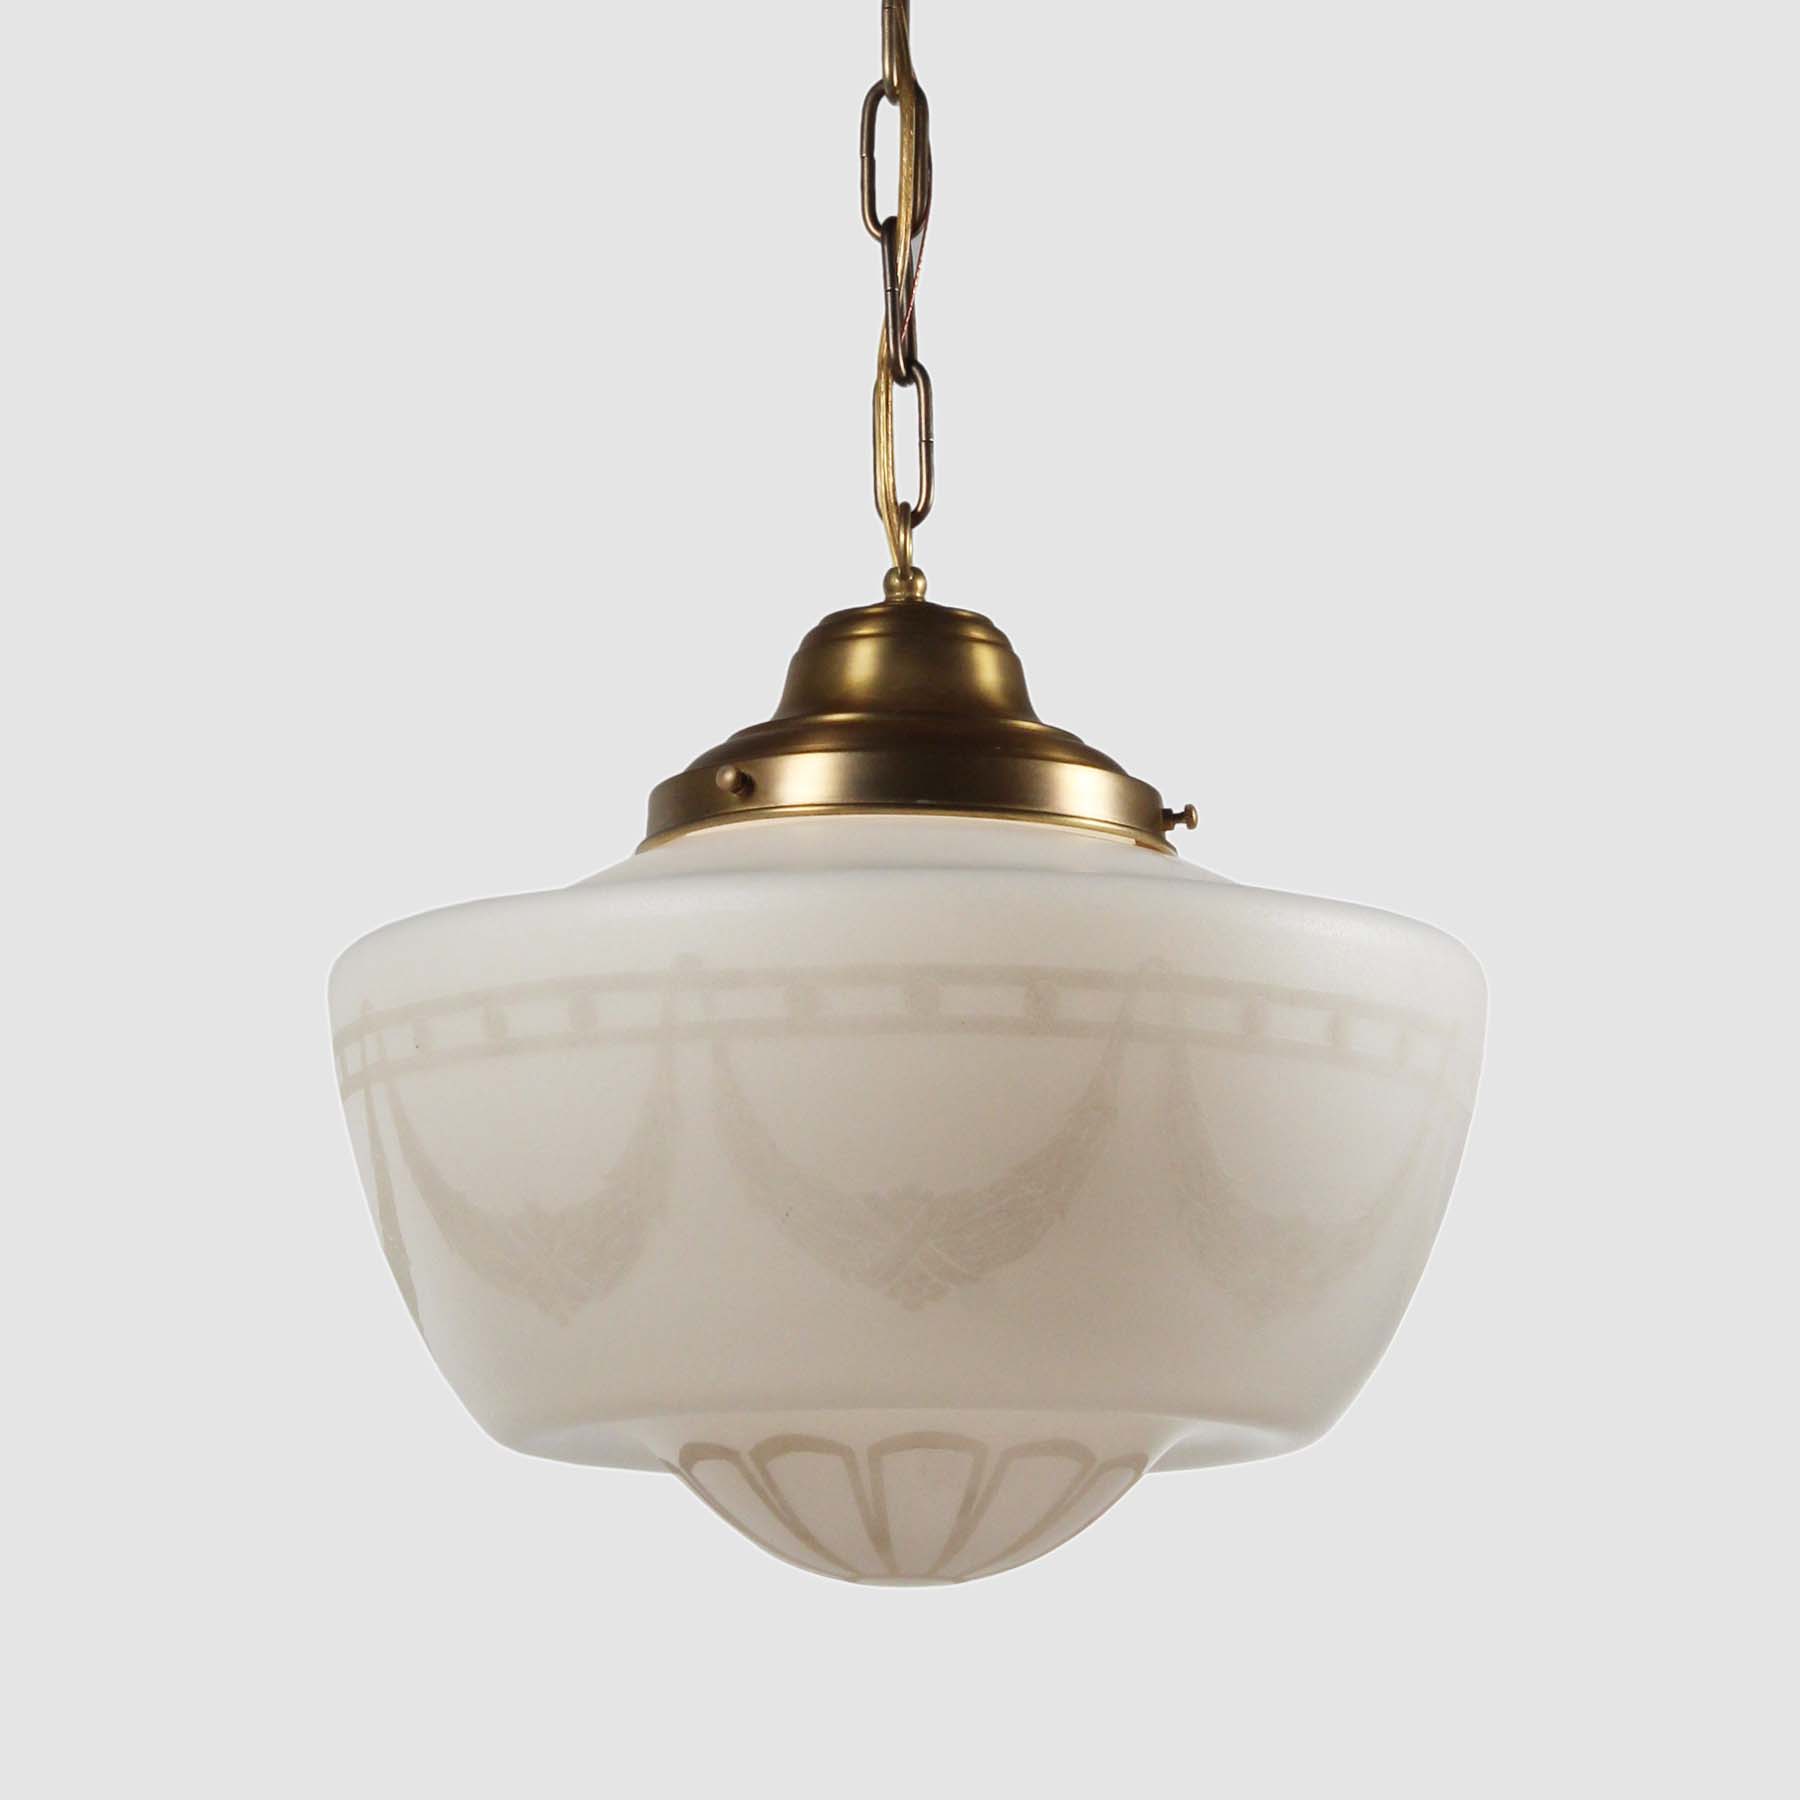 Antique Neoclassical Pendant Lights with Acid Cut-Back Shades-71235